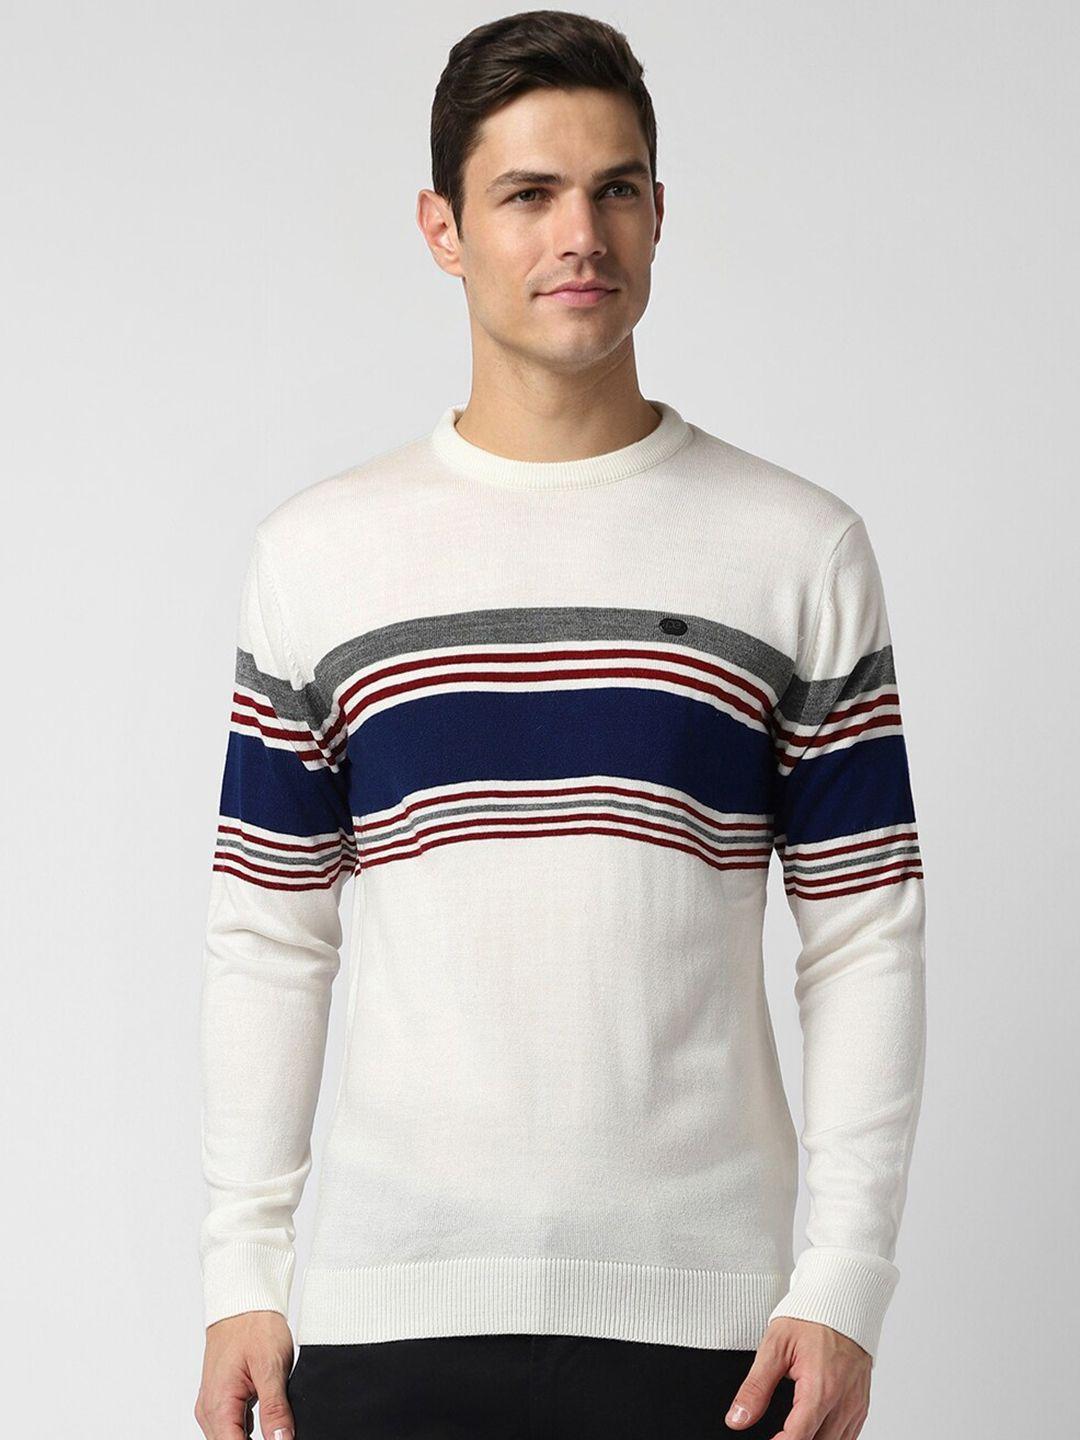 peter england casuals horizontal striped pullover